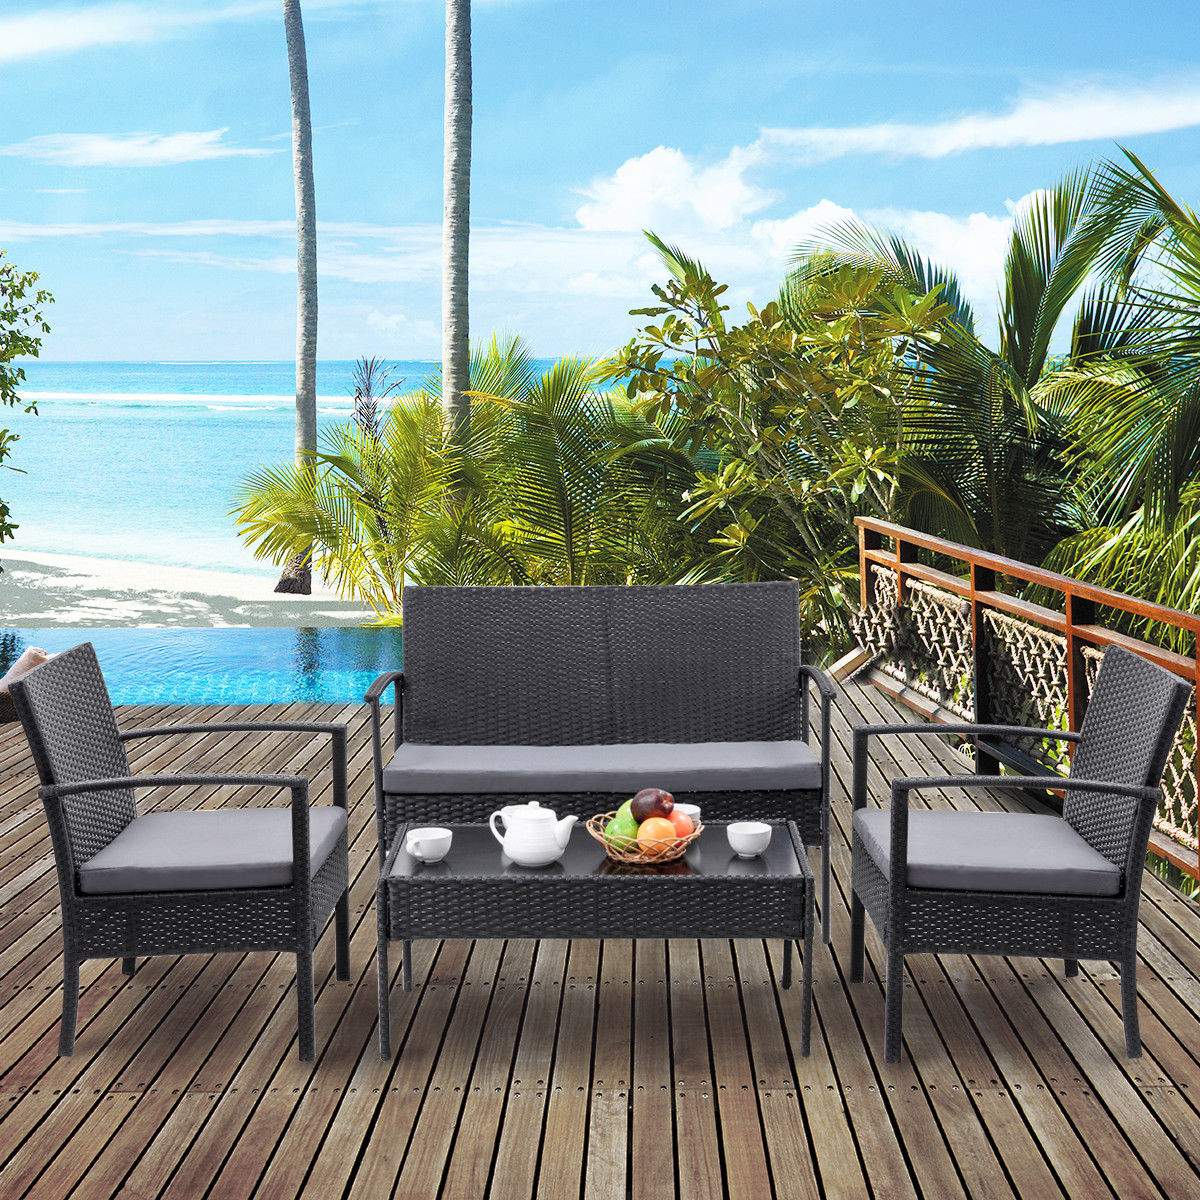 Us 15979 Costway 4 Pcs Outdoor Patio Rattan Wicker Furniture Set Table Sofa Cushioned Deck Black In Sofa Tables From Furniture On Aliexpress throughout proportions 1200 X 1200